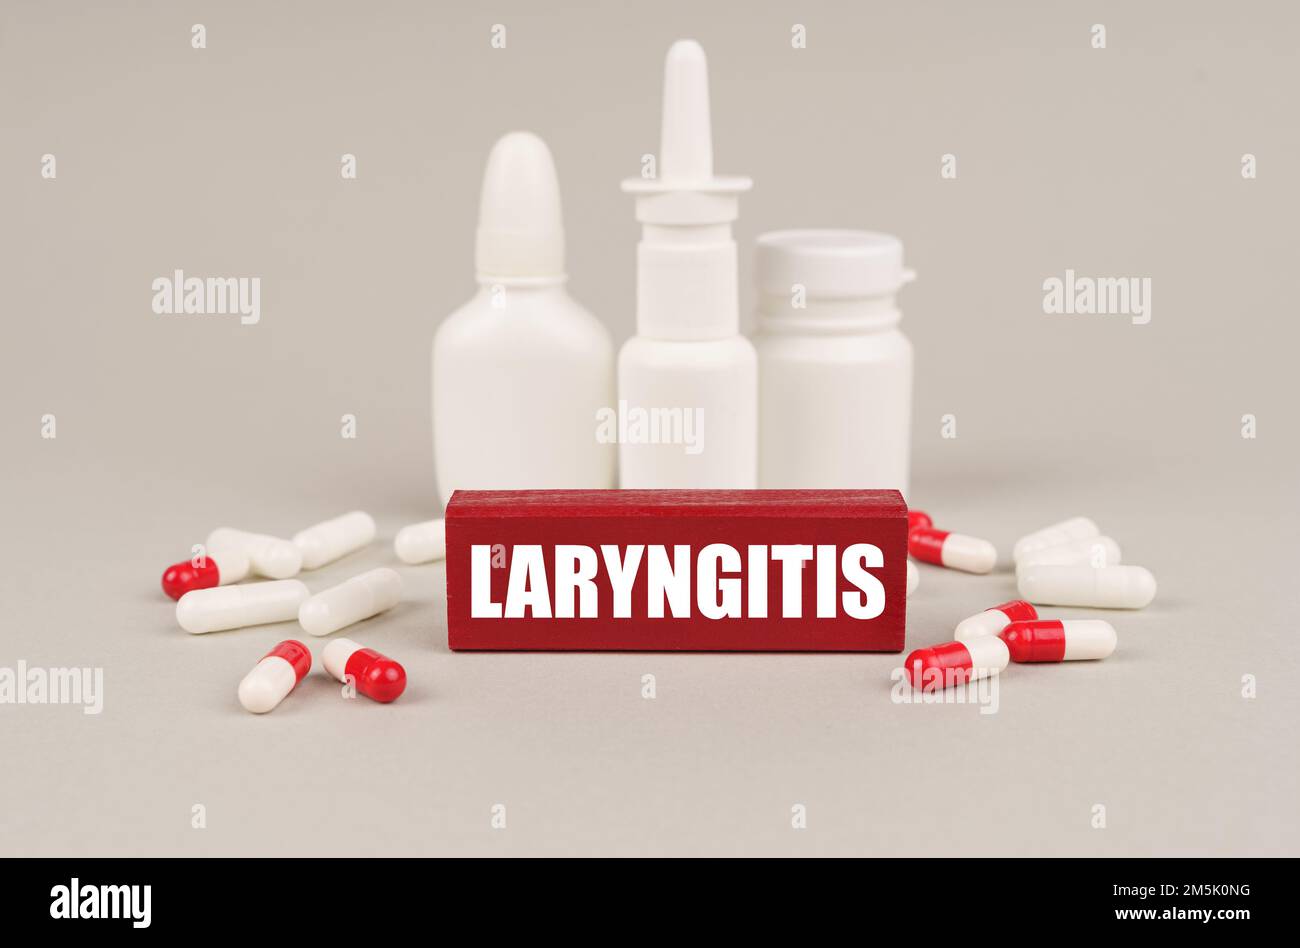 Medical concept. On a gray surface are pills, white jars and a red wooden block with the inscription - Laryngitis Stock Photo